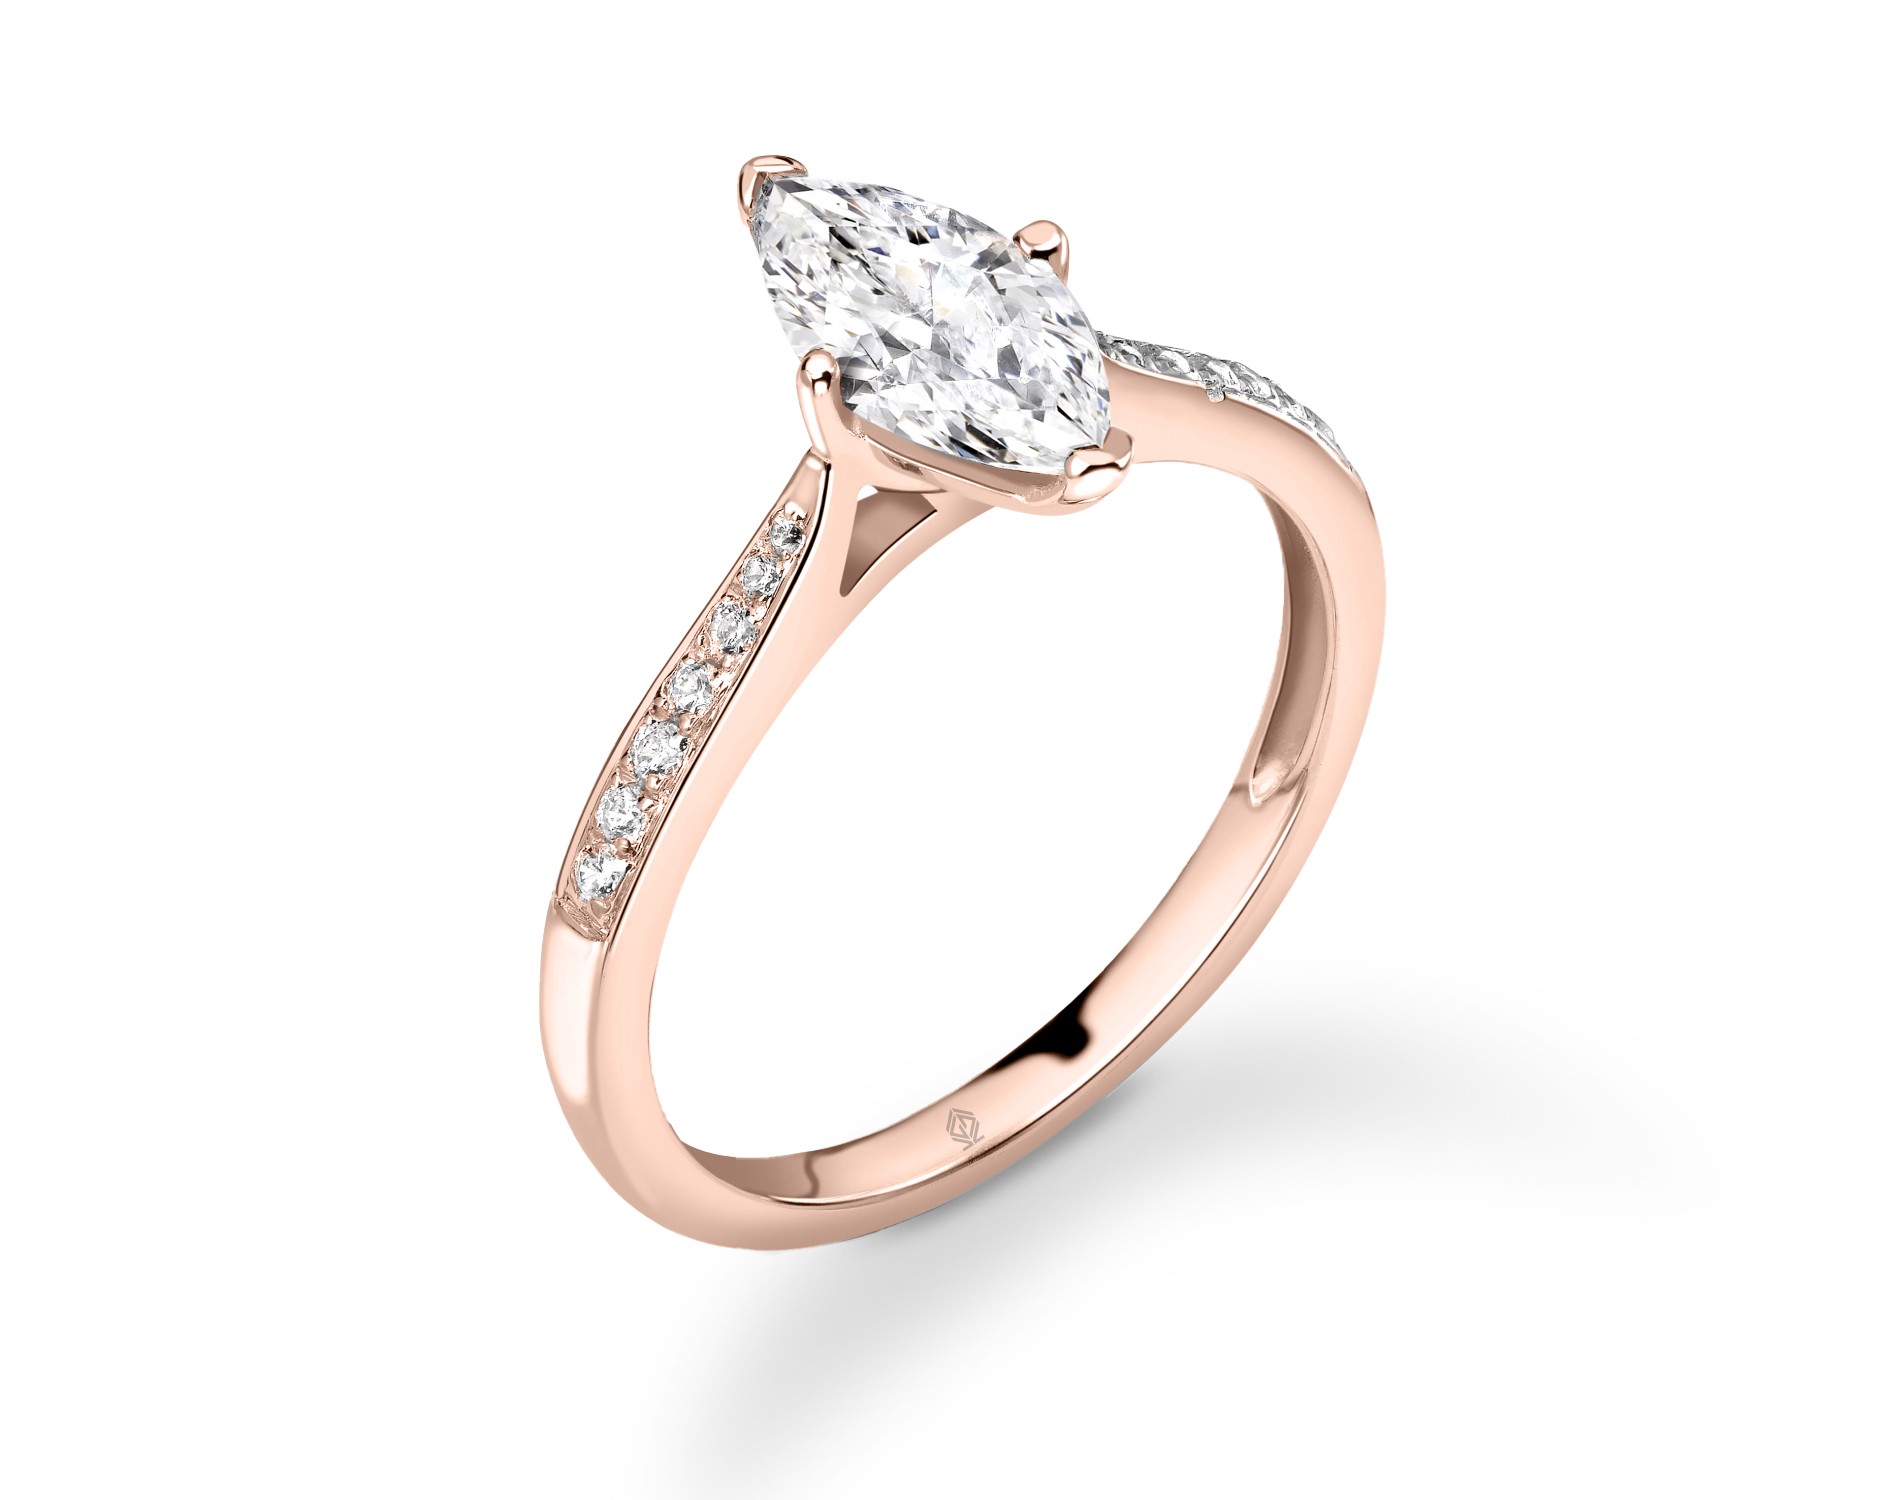 18K ROSE GOLD MARQUISE CUT DIAMOND ENGAGEMENT RING WITH SIDE STONES CHANNEL SET